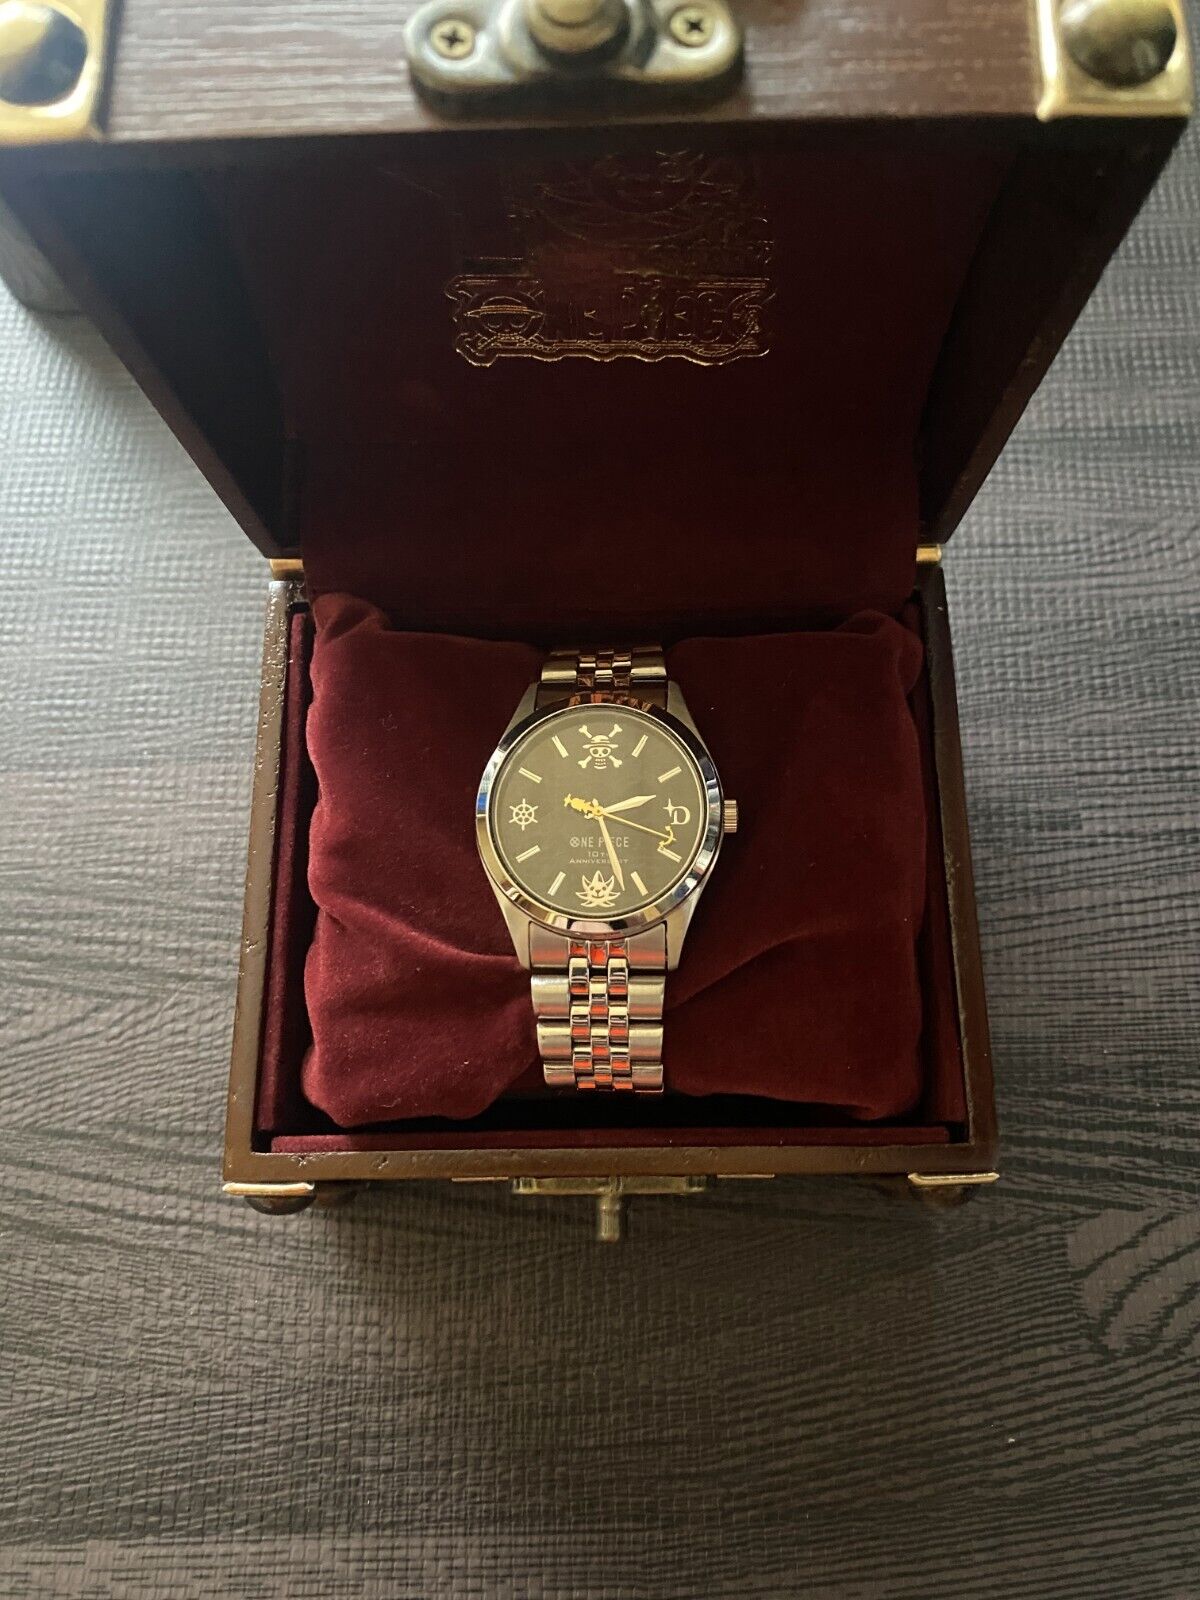 ONE PIECE Official 10th Anniversary Watch Golden Pose Limited to 9999 Japan